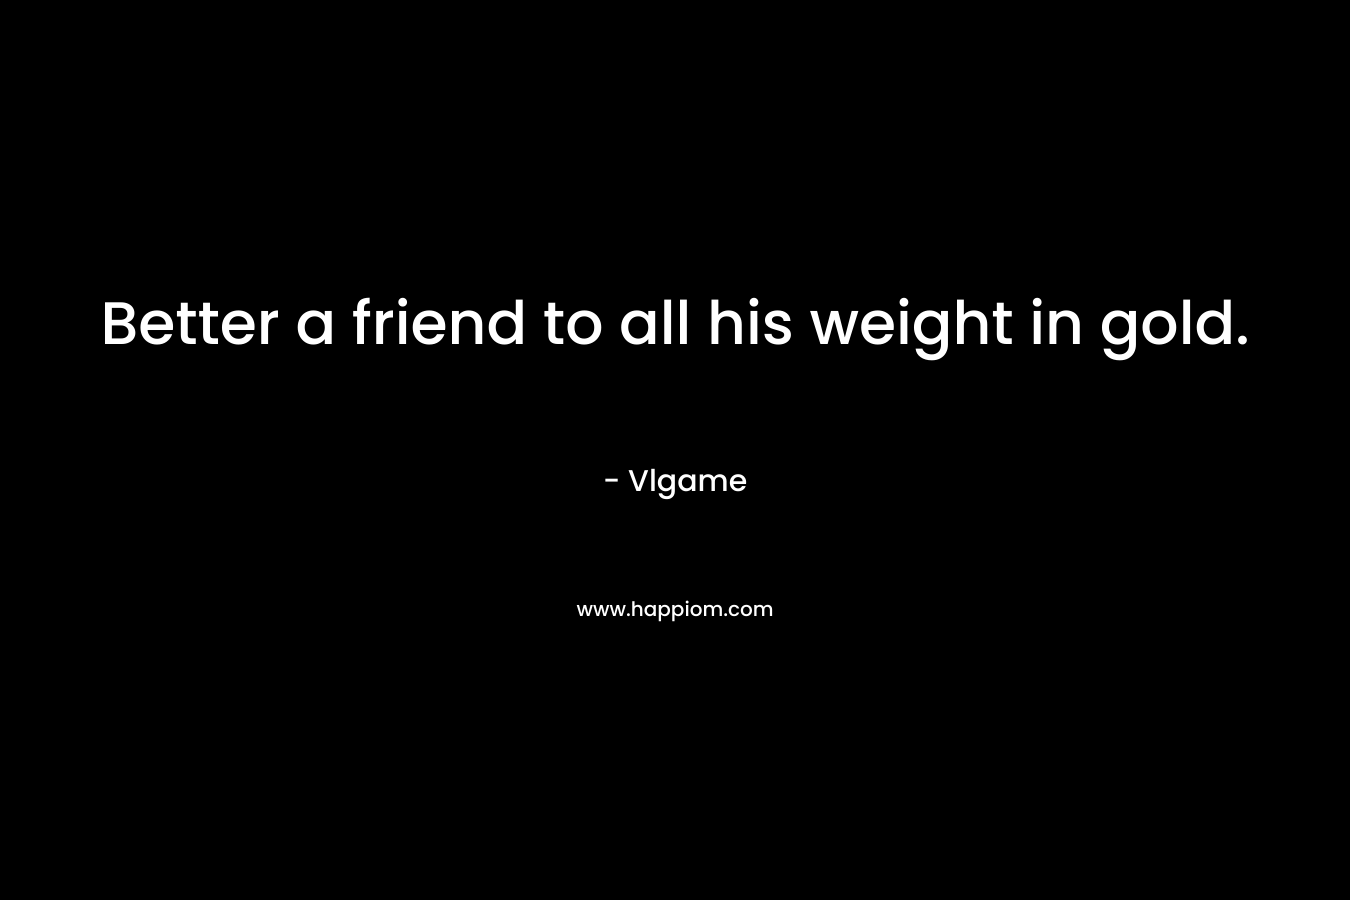 Better a friend to all his weight in gold.